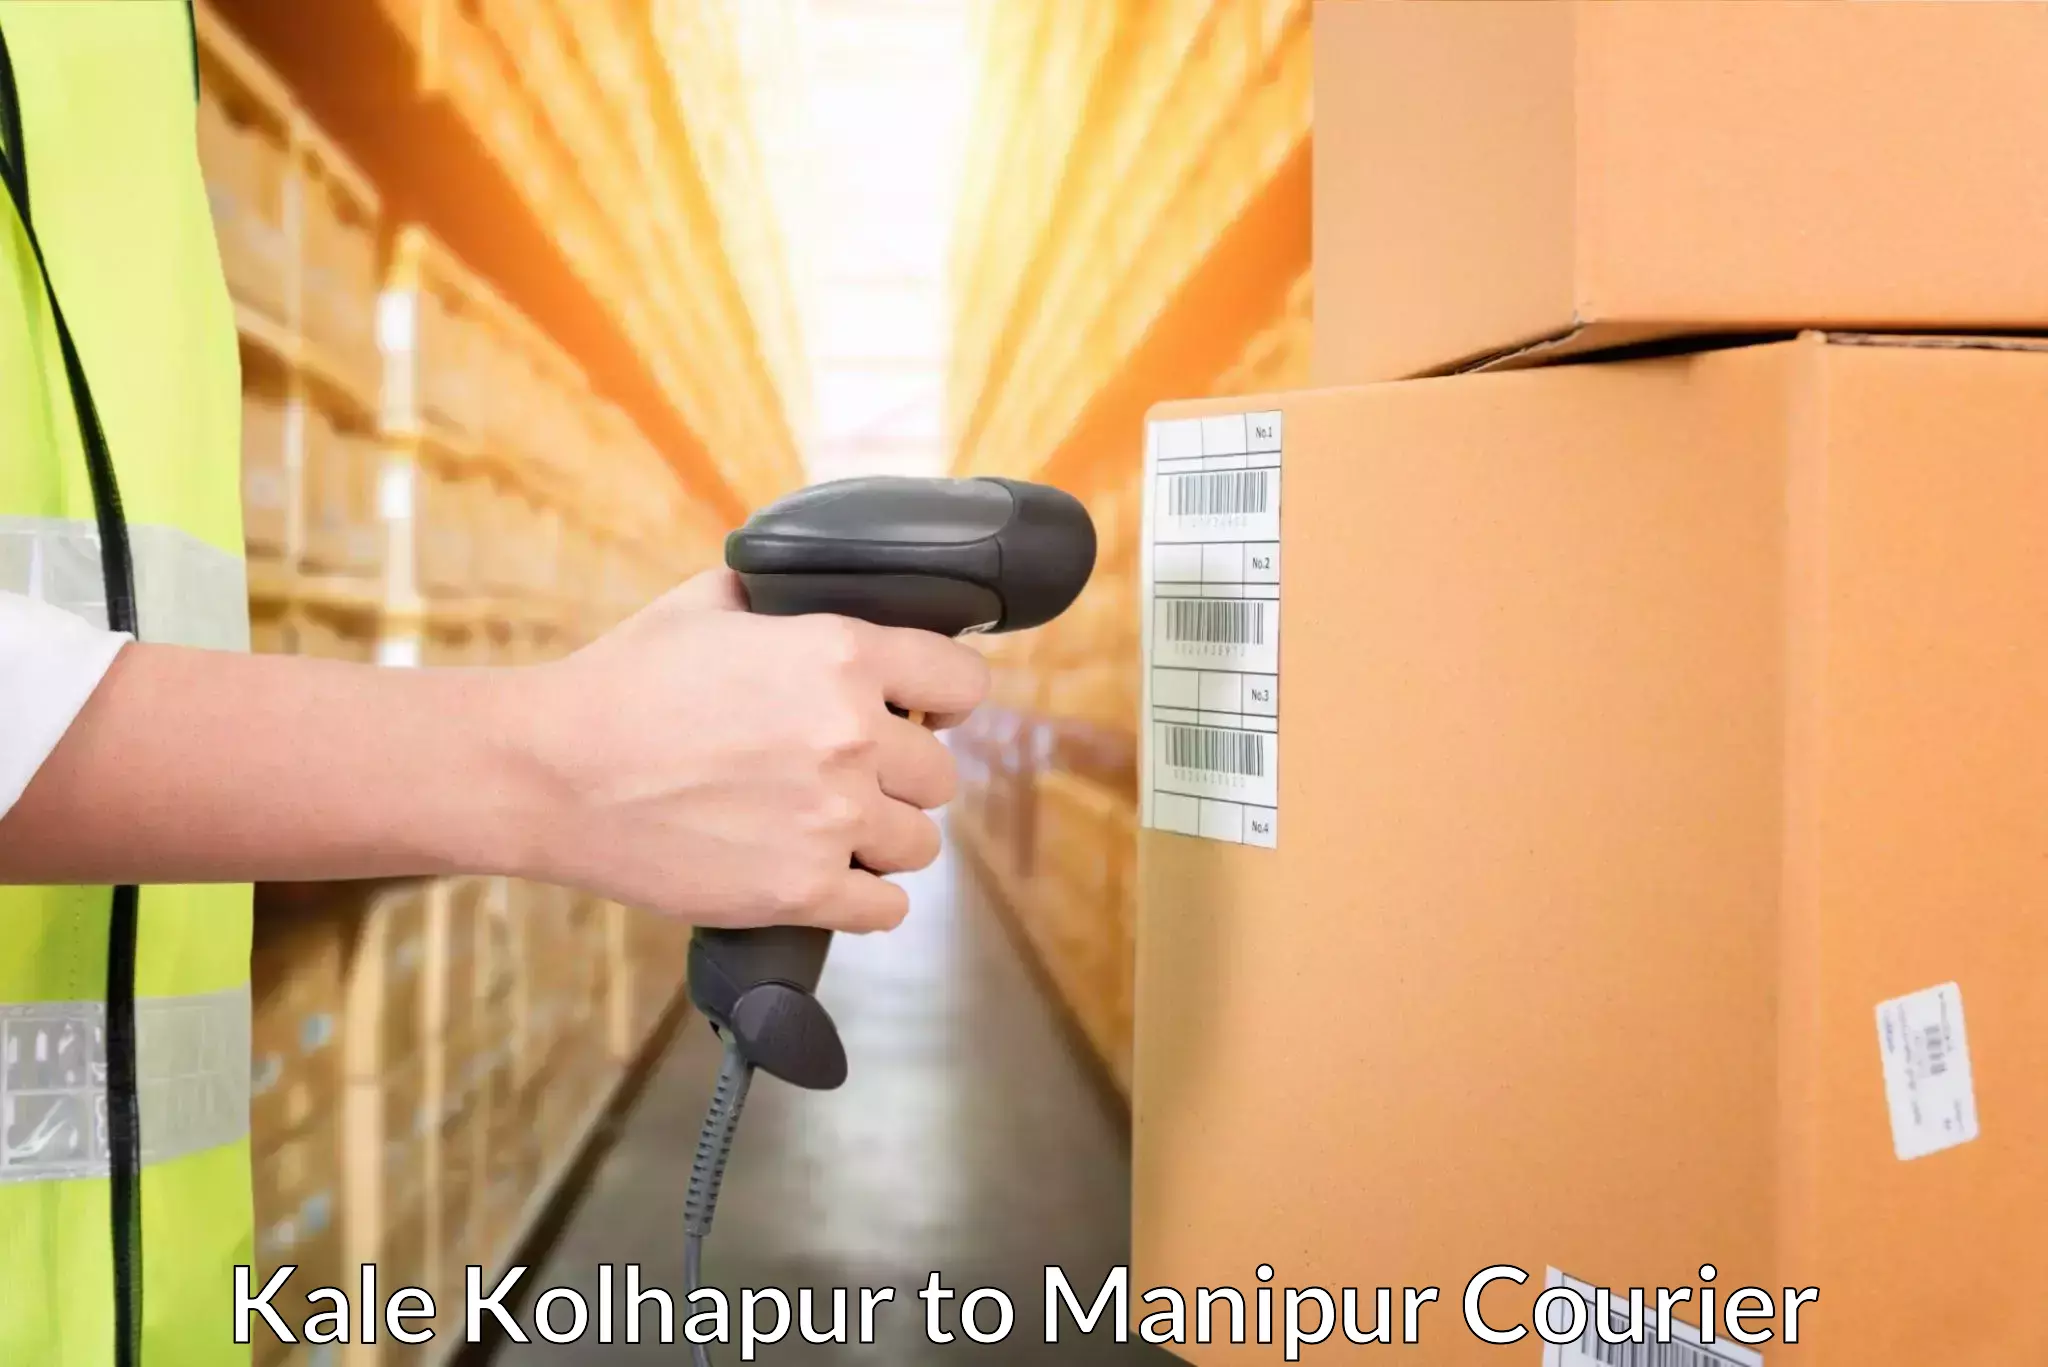 Courier service innovation Kale Kolhapur to Kakching